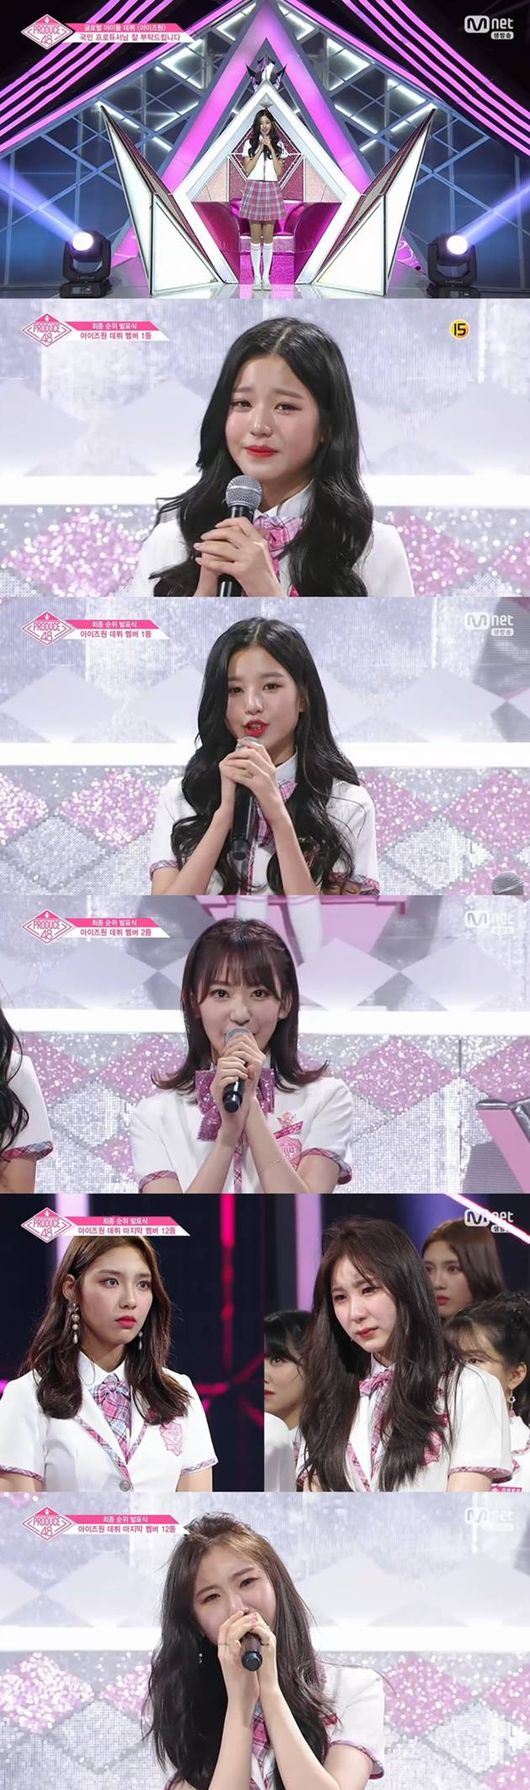 It is a ripple force that will lead from I.O.I to Wanna One and again to Aizwon.Through the cable channel Mnet Survival program ProDeuce 48, 12 members of Aizwon who will act as a global girl group have been completed.It was the final stage of tears from the starship Jang Won-young who won the final prize to Lee Chae-yeon of WM who joined dramatically.The final live broadcast of ProDeuce 48 was released on the afternoon of the 31st. The last 100 DaysIt was a special stage for the TOP20, which was on the final stage with intense survival, and the desire of Idol Producer who came to the final stage to unfold their dreams was conveyed.The name of the new girl group to be born through ProDeuce 48 was decided to be Aizwon.It was a team that was born with the possibility of growing into a national group connecting Wanna One of I.O.I Season 2 of ProDeuce 101 season 1.Unlike last season, it is an aspiration to grow into a group representing both Korea and Japan.Aizwon consisted of 12 members from Korea and Japan.From the first place Jang Won-young, Miyawaki Sakura, Cho Yuri, Choi Ye-na, An Yoo-jin, Yabuki Nako, Kwon Eun-bi, Kang Hye-won, Honda Hitomi, Kim Chae-won, Kim Min-joo and Lee Chae-yeon were named as 12 members.The 12 members of the IZWON members released on the final live broadcast were the result of repeated reversals.The members who were expected to make their debut were eliminated, and Idol Producer who became final members due to a sharp rise were also included: Aizone, which was completed with celebration and regret.The ProDeuce series is teamed with members who leave their skills and are directly selected by national producers (viewers).I.O.I and Wanna One were also made up of members only by the votes of national producers, and their fandom was solid and powerful.Following I.O.I and Wanna One, this time, Aizwon is the turn to prove the ripple effect of the ProDeuce series.It has attracted a lot of attention since the start of the third season, and it is expected to have a considerable ripple force this time because it has started to collect fandom in both Korea and Japan.Most of the members who became IZWAN have already shown their skills, charms and various talents through ProDeuce 48.Most of the members have a growth story, so it is expected to play a good role in collecting fandom.IZWON, which became the choice of national producers after I.O.I and Wanna One, is drawing attention as to whether a big newcomer will be born by sweeping the music industry with as intense ripple power as expected.Mnet broadcast screen capture